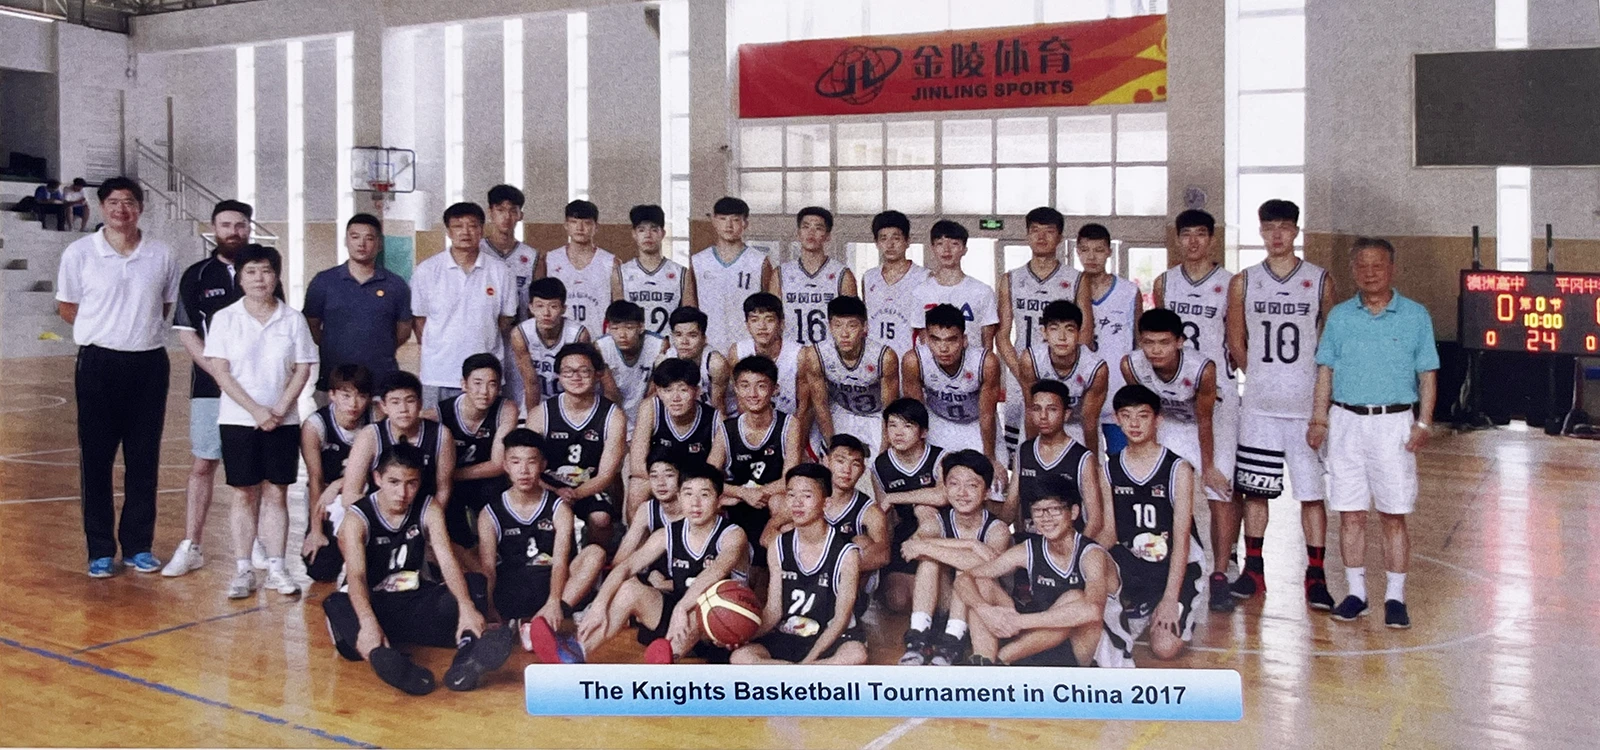  Knights Basketball Tournament in China 2017